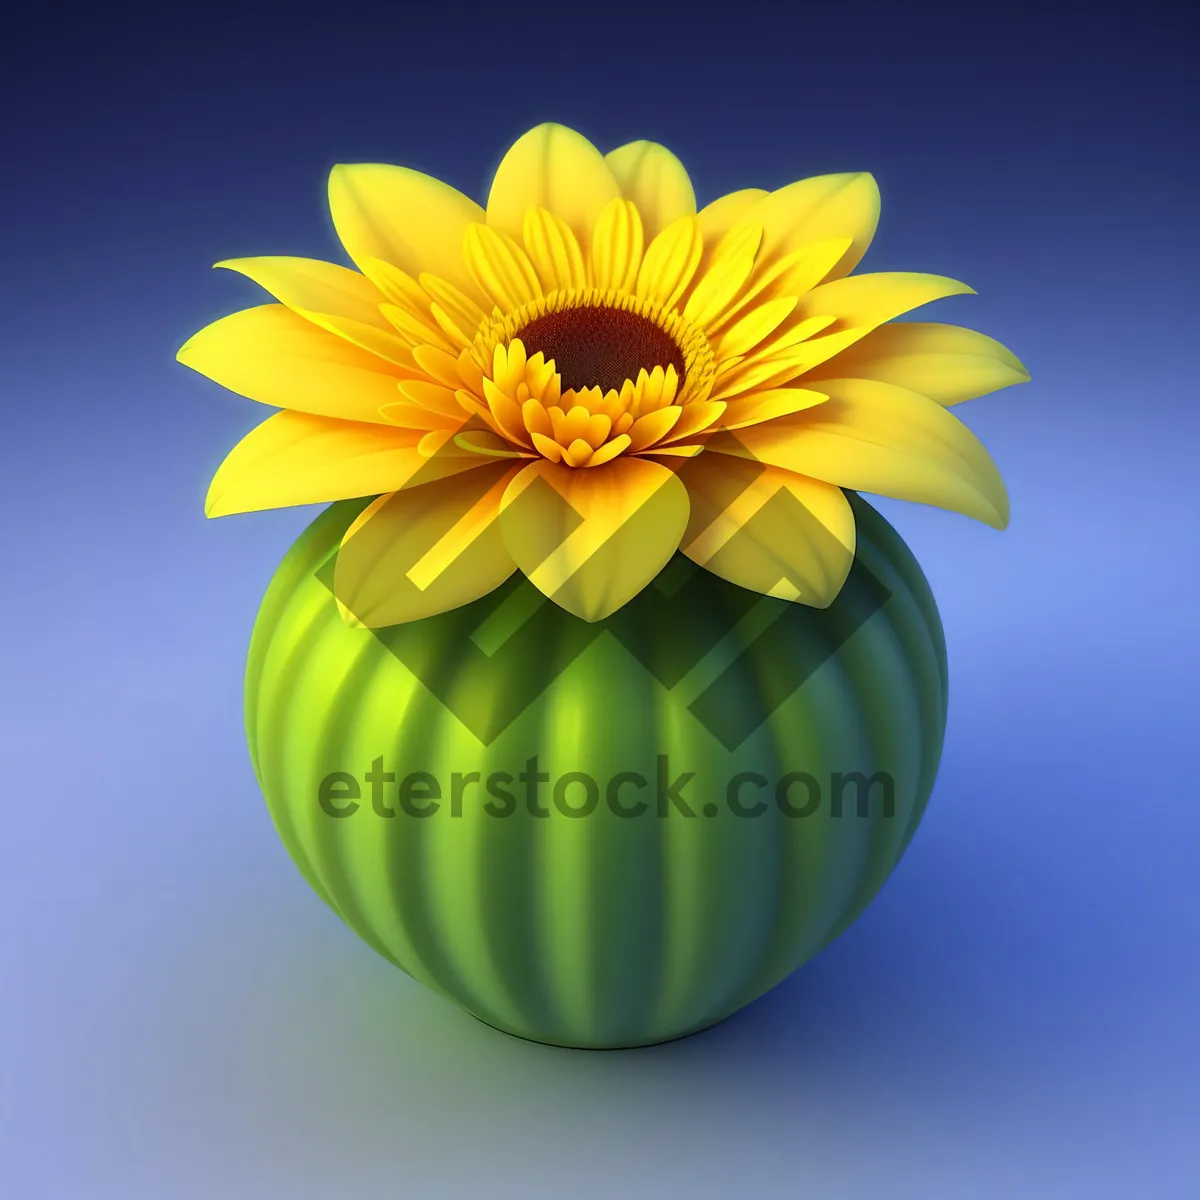 Picture of Vibrant Sunflower Blooming in a Summer Garden